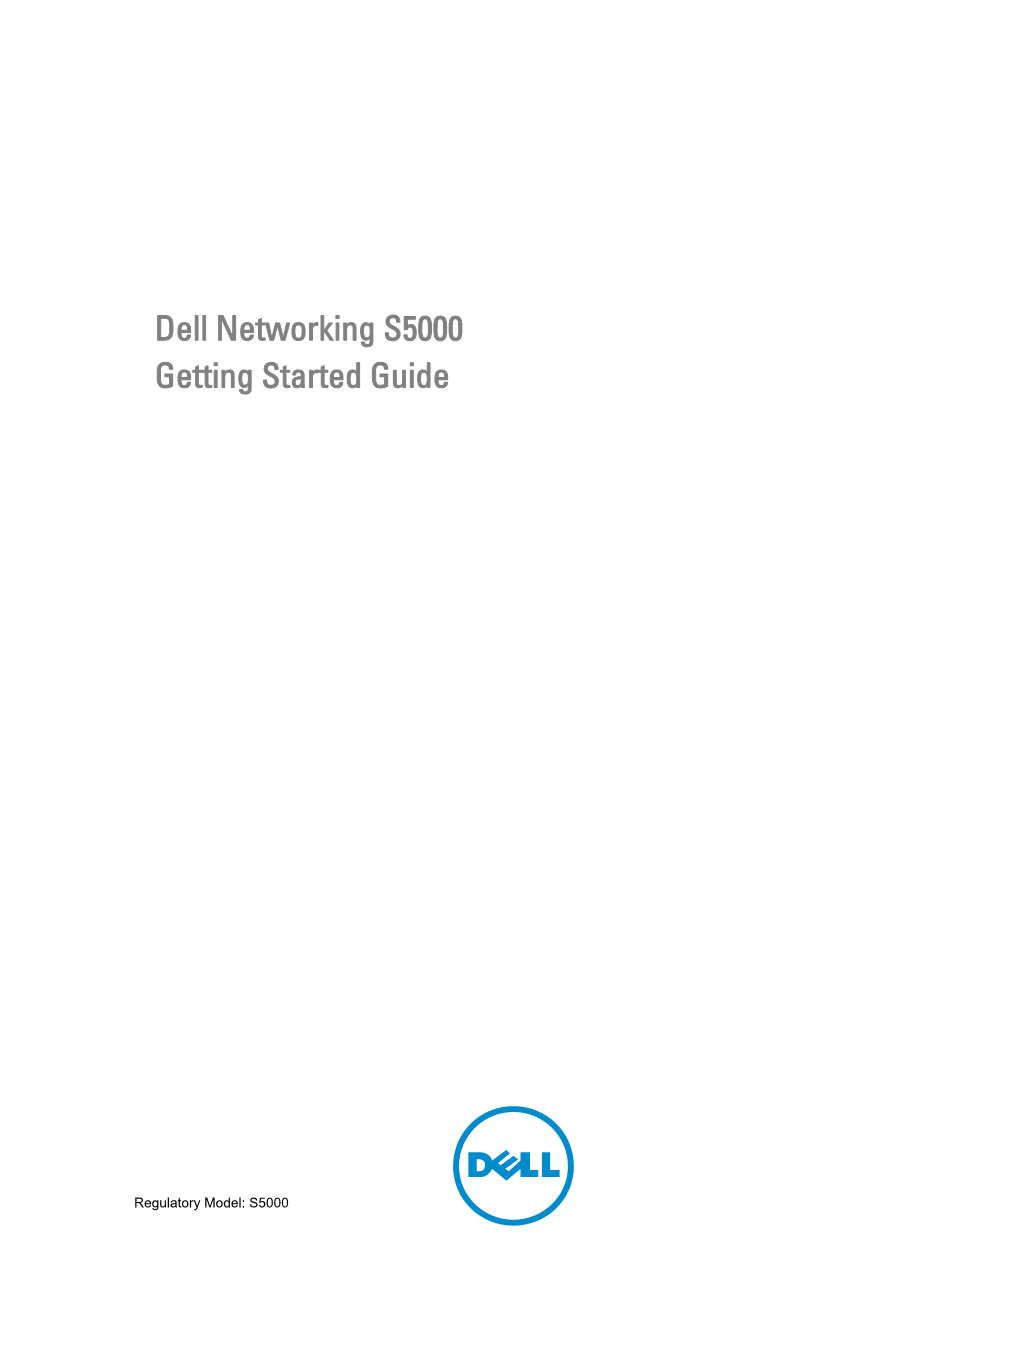 Dell Networking S5000 Getting Started Guide